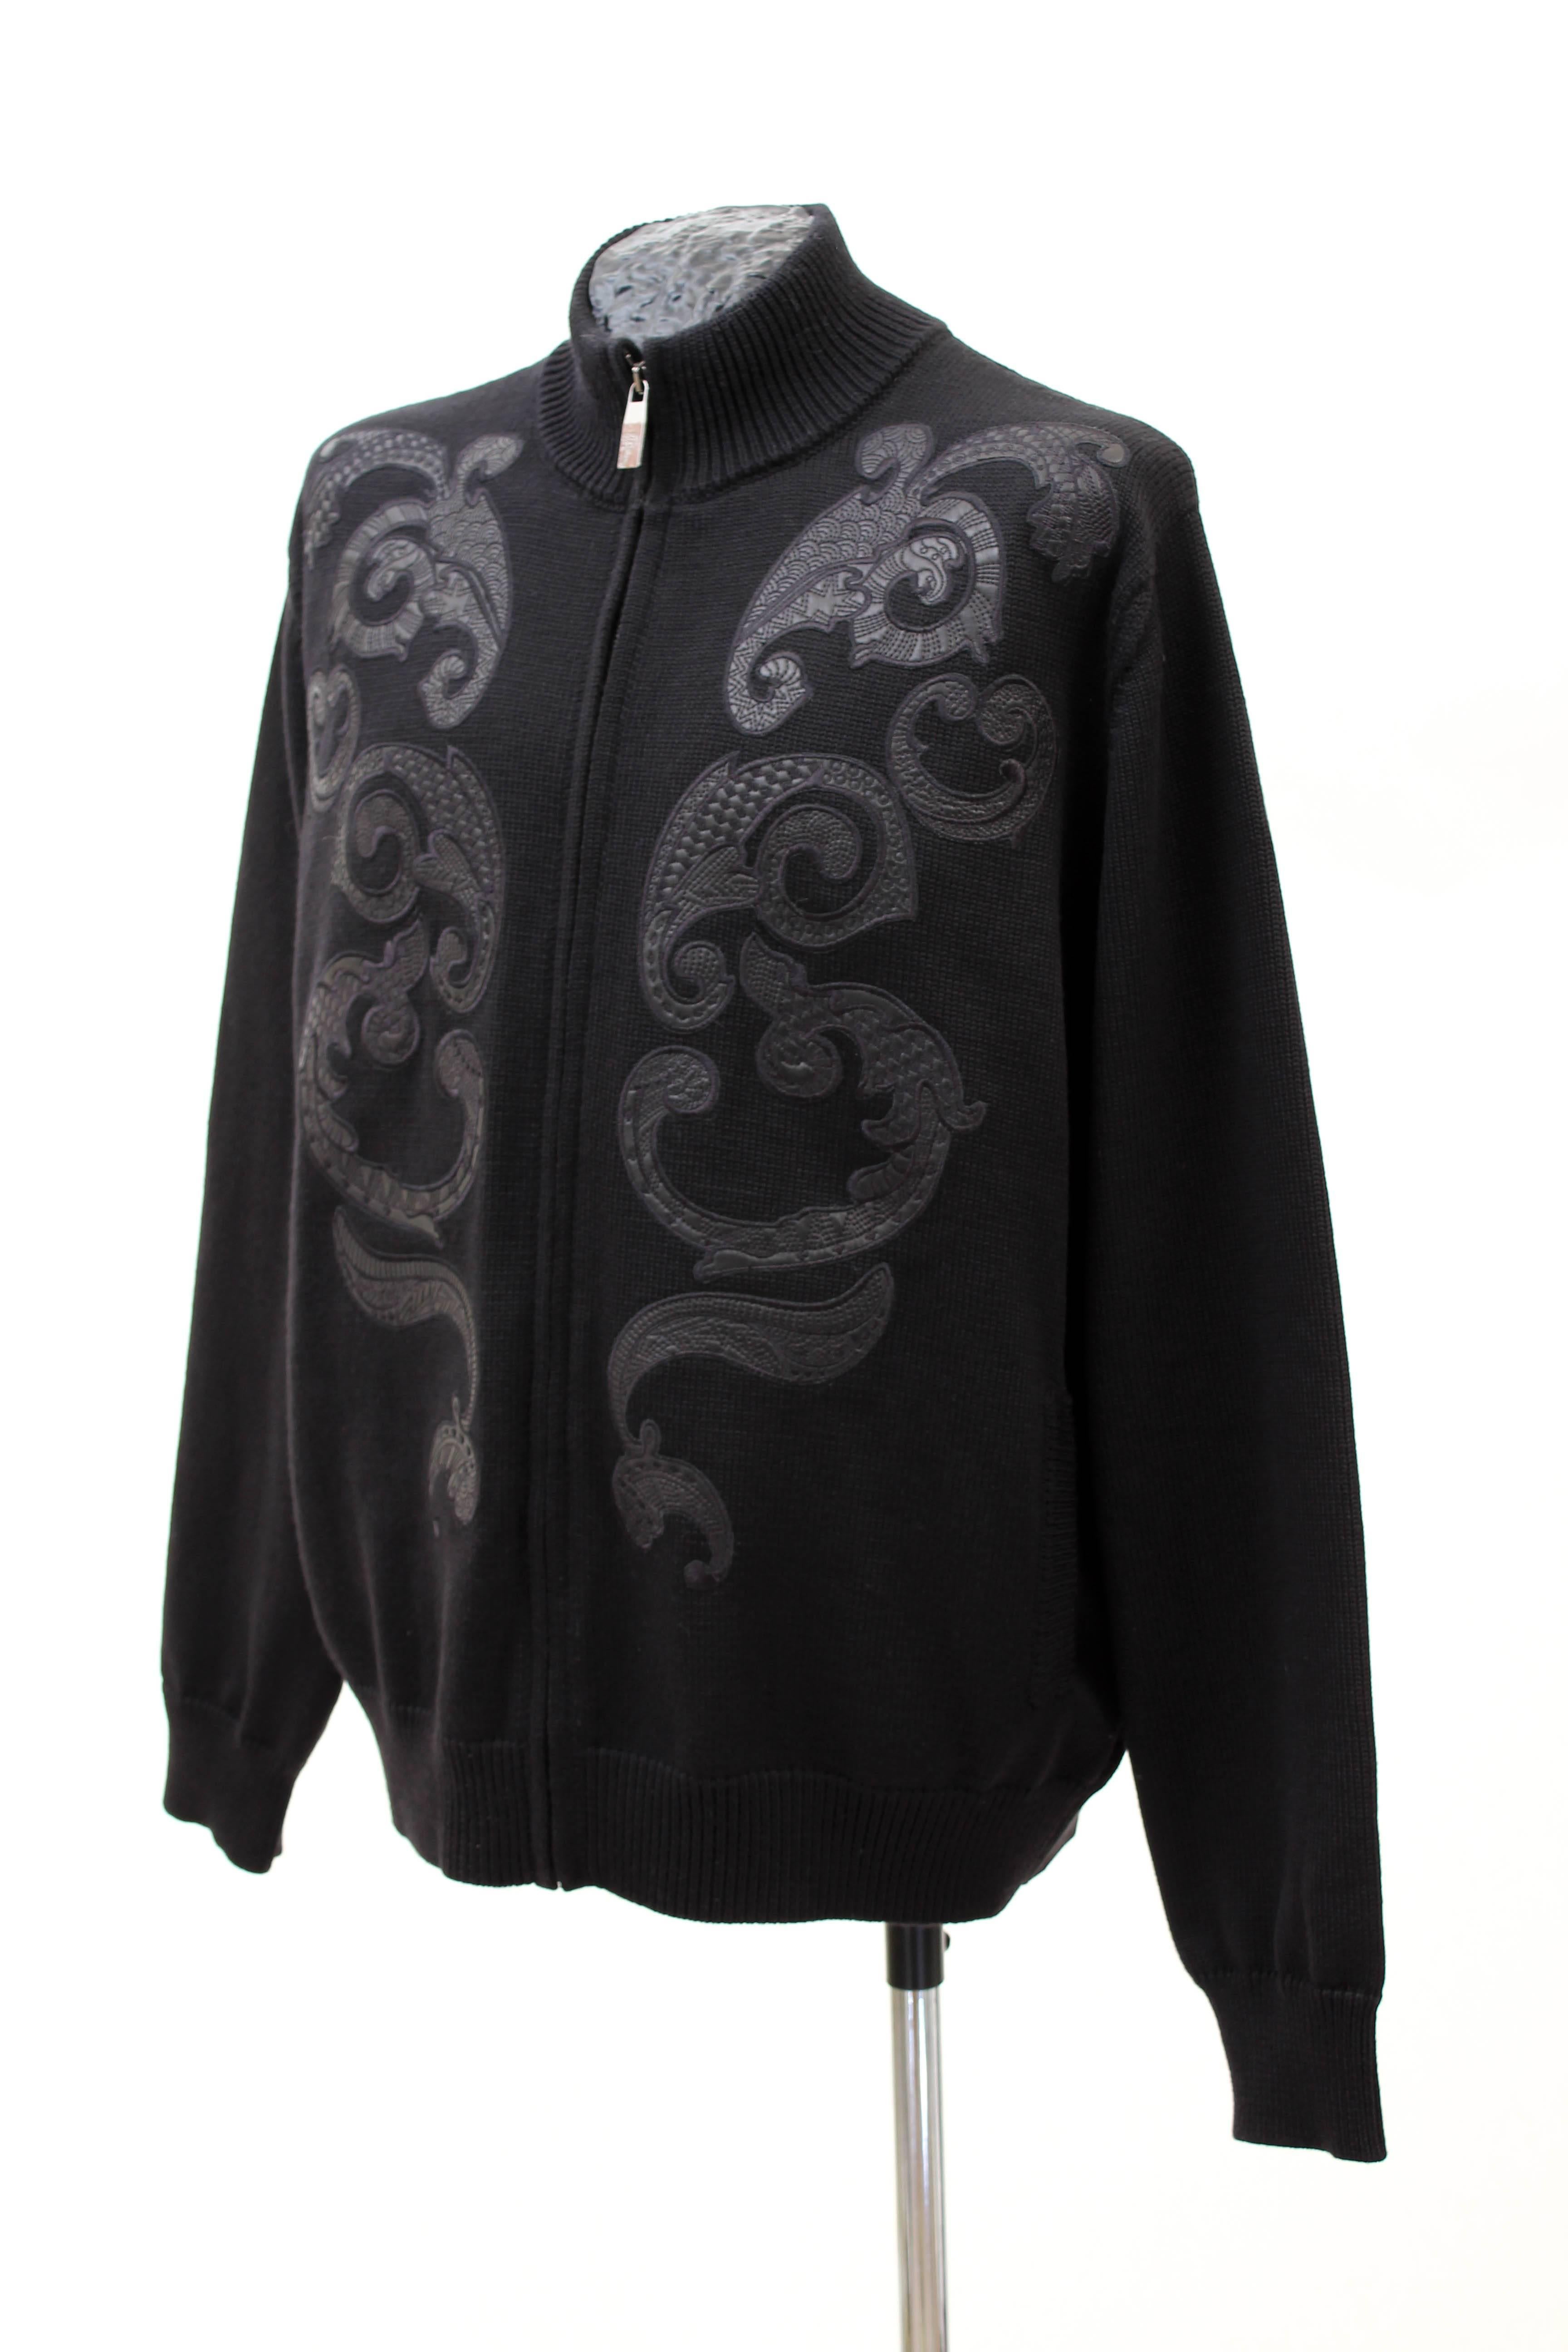 VERSACE  CARDIGAN for MEN

 Bring a touch of luxury to a chic everyday wardrobe with VERSACE's black wool cardigan.

You'll be wearing this classic piece for seasons to come!

100% wool
Tonal Barocco applique
Color: Black
Long sleeves